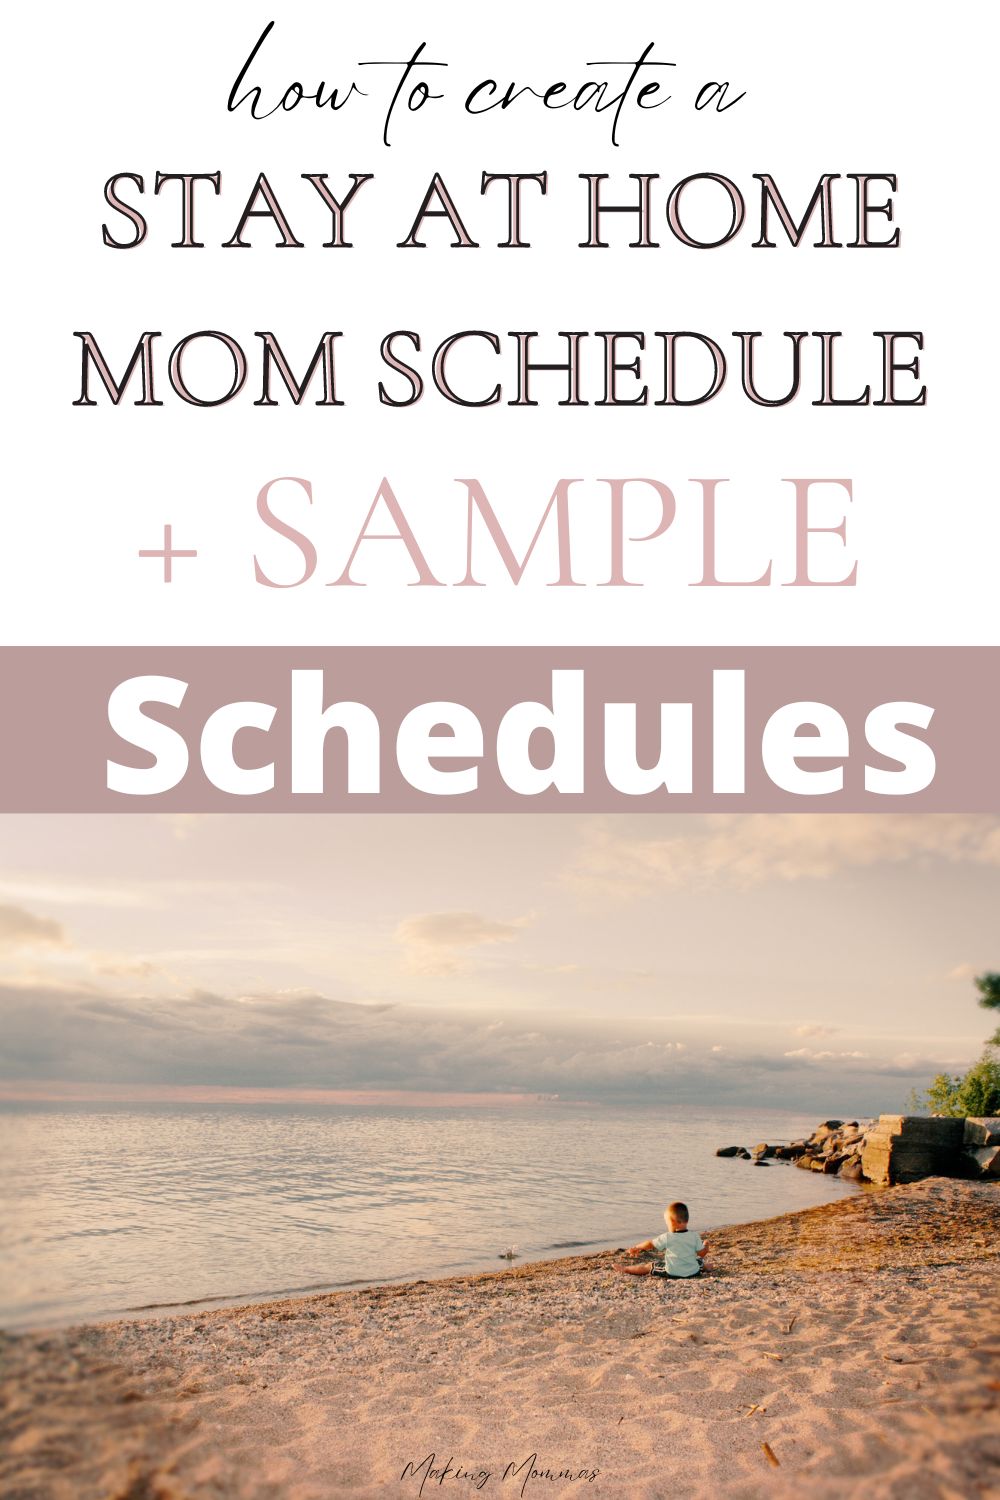 Pin image that reads, "How to create a stay at home mom schedule plus sample schedules", with an image of a little boy sitting on the beach.